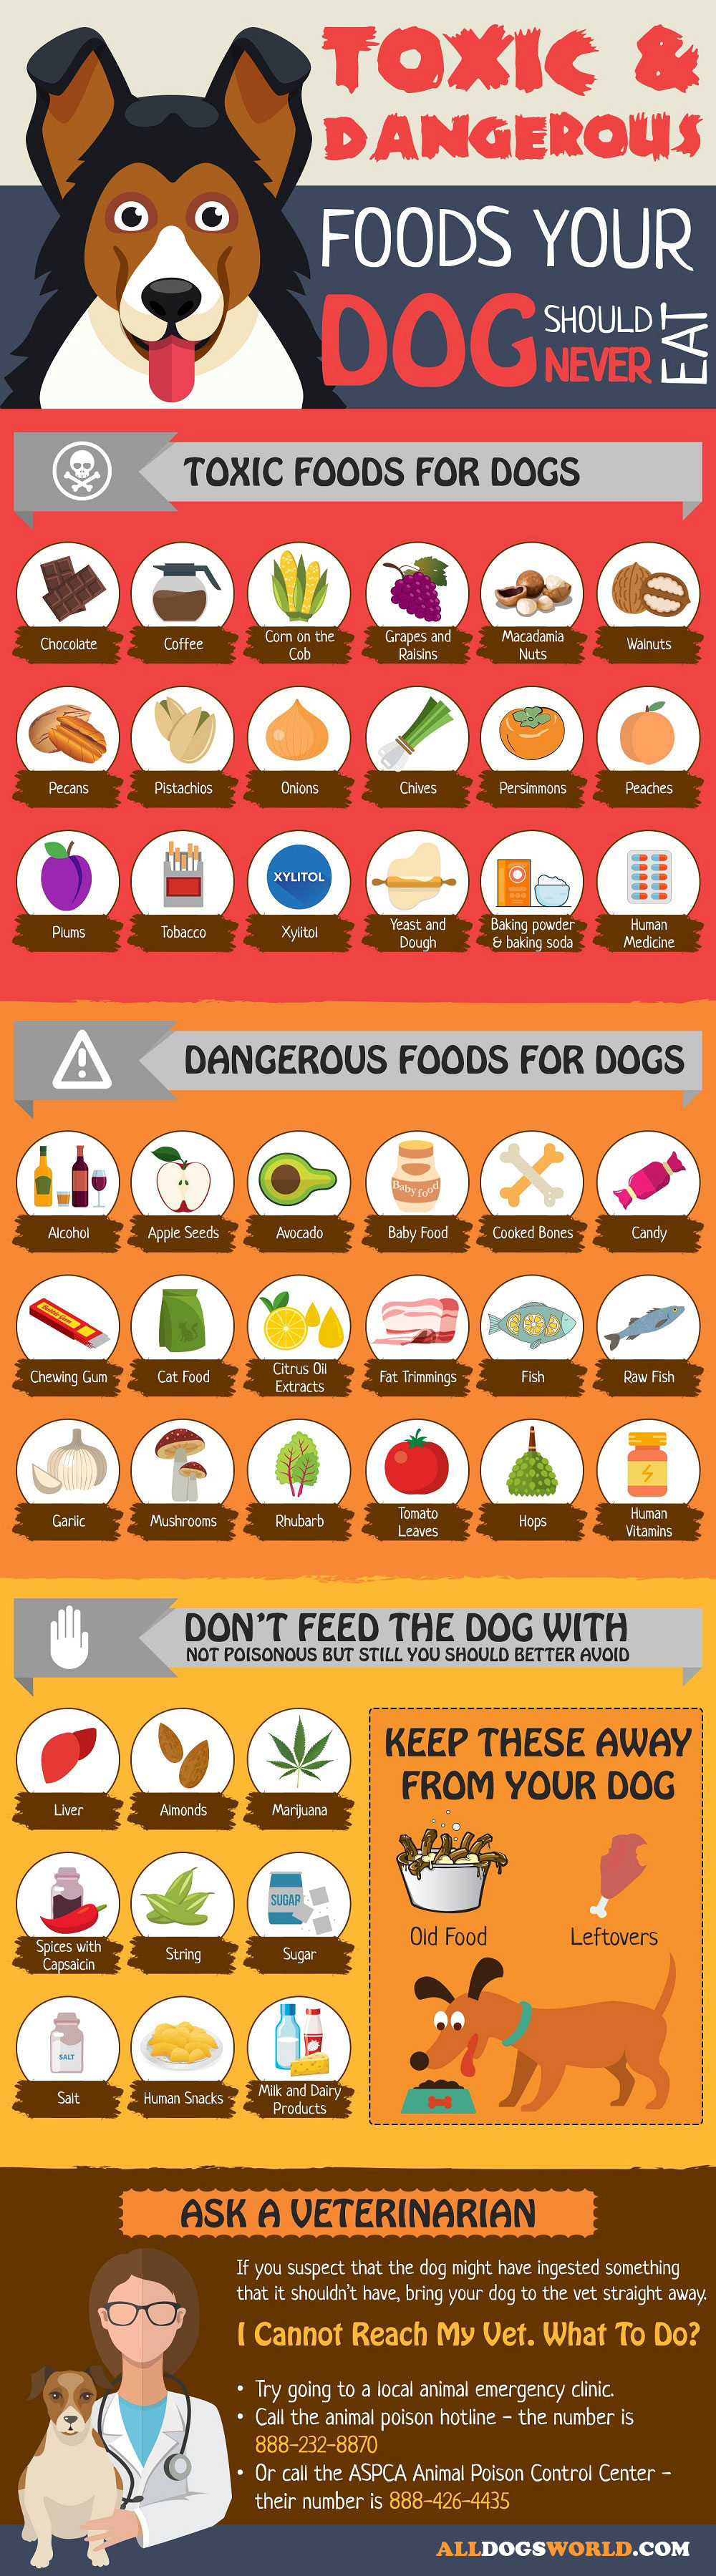 Toxic Foods For Dogs List Dangerous Foods For Dogs Alldogsworld